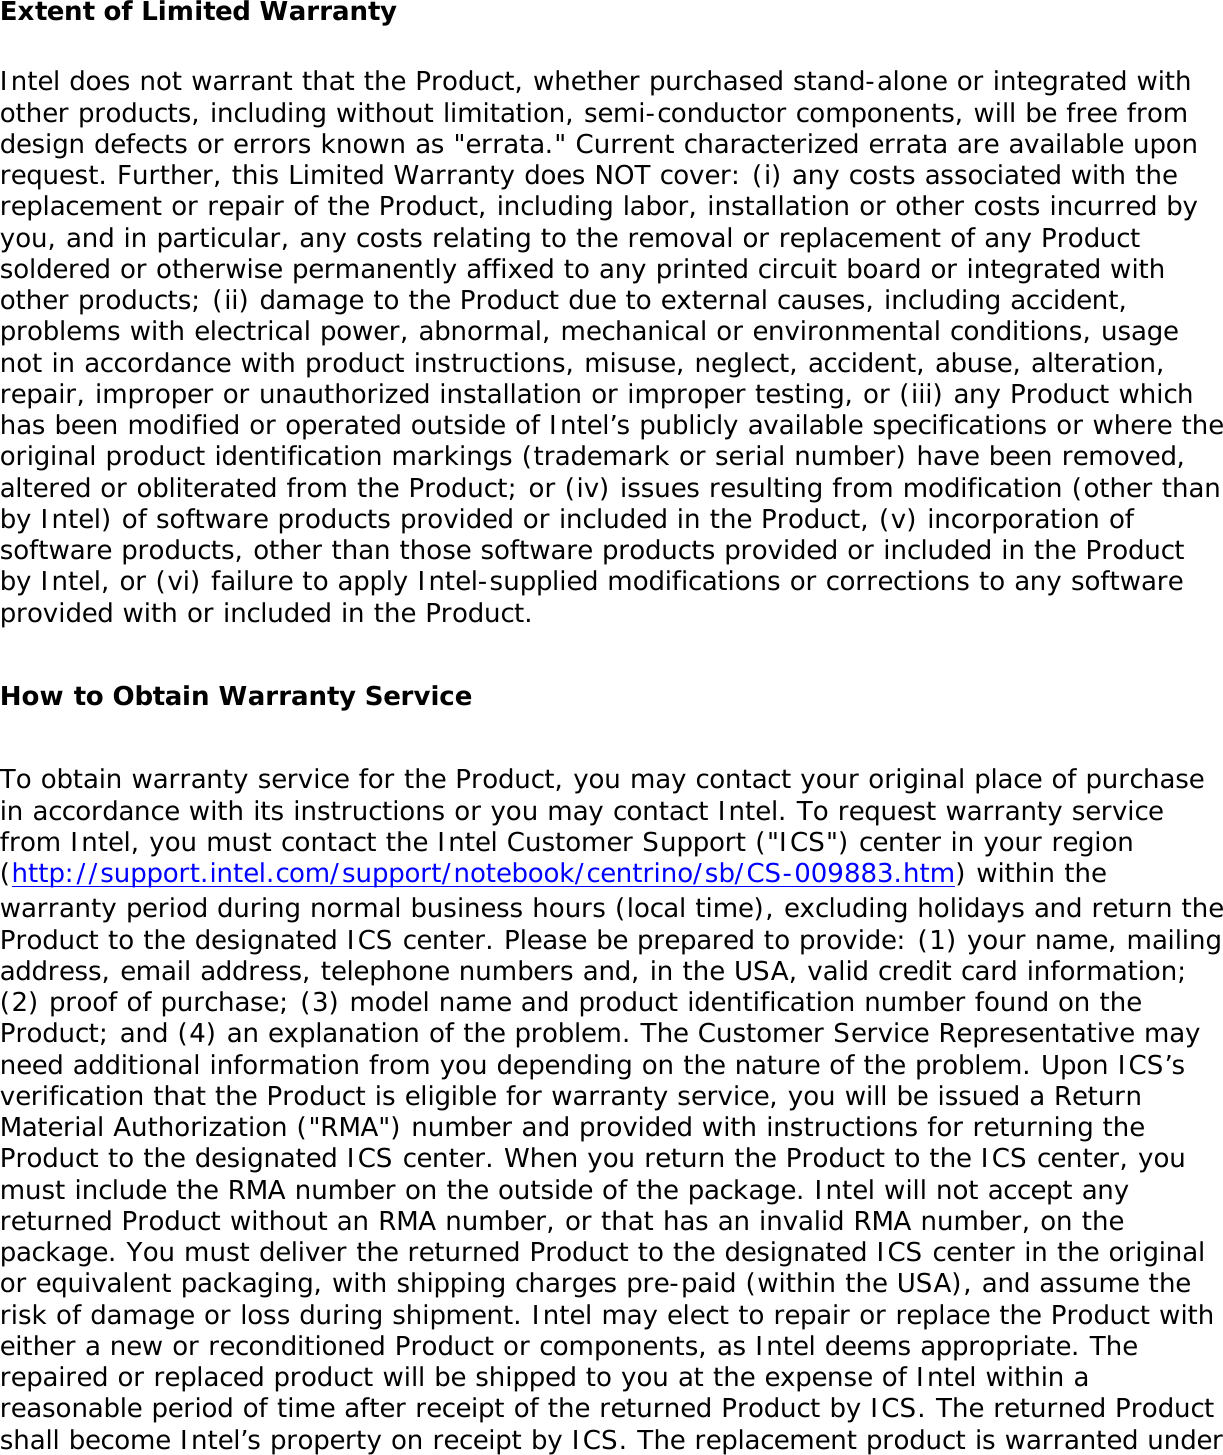 Extent of Limited WarrantyIntel does not warrant that the Product, whether purchased stand-alone or integrated with other products, including without limitation, semi-conductor components, will be free from design defects or errors known as &quot;errata.&quot; Current characterized errata are available upon request. Further, this Limited Warranty does NOT cover: (i) any costs associated with the replacement or repair of the Product, including labor, installation or other costs incurred by you, and in particular, any costs relating to the removal or replacement of any Product soldered or otherwise permanently affixed to any printed circuit board or integrated with other products; (ii) damage to the Product due to external causes, including accident, problems with electrical power, abnormal, mechanical or environmental conditions, usage not in accordance with product instructions, misuse, neglect, accident, abuse, alteration, repair, improper or unauthorized installation or improper testing, or (iii) any Product which has been modified or operated outside of Intel’s publicly available specifications or where the original product identification markings (trademark or serial number) have been removed, altered or obliterated from the Product; or (iv) issues resulting from modification (other than by Intel) of software products provided or included in the Product, (v) incorporation of software products, other than those software products provided or included in the Product by Intel, or (vi) failure to apply Intel-supplied modifications or corrections to any software provided with or included in the Product.   How to Obtain Warranty Service    To obtain warranty service for the Product, you may contact your original place of purchase in accordance with its instructions or you may contact Intel. To request warranty service from Intel, you must contact the Intel Customer Support (&quot;ICS&quot;) center in your region (http://support.intel.com/support/notebook/centrino/sb/CS-009883.htm) within the warranty period during normal business hours (local time), excluding holidays and return the Product to the designated ICS center. Please be prepared to provide: (1) your name, mailing address, email address, telephone numbers and, in the USA, valid credit card information; (2) proof of purchase; (3) model name and product identification number found on the Product; and (4) an explanation of the problem. The Customer Service Representative may need additional information from you depending on the nature of the problem. Upon ICS’s verification that the Product is eligible for warranty service, you will be issued a Return Material Authorization (&quot;RMA&quot;) number and provided with instructions for returning the Product to the designated ICS center. When you return the Product to the ICS center, you must include the RMA number on the outside of the package. Intel will not accept any returned Product without an RMA number, or that has an invalid RMA number, on the package. You must deliver the returned Product to the designated ICS center in the original or equivalent packaging, with shipping charges pre-paid (within the USA), and assume the risk of damage or loss during shipment. Intel may elect to repair or replace the Product with either a new or reconditioned Product or components, as Intel deems appropriate. The repaired or replaced product will be shipped to you at the expense of Intel within a reasonable period of time after receipt of the returned Product by ICS. The returned Product shall become Intel’s property on receipt by ICS. The replacement product is warranted under 